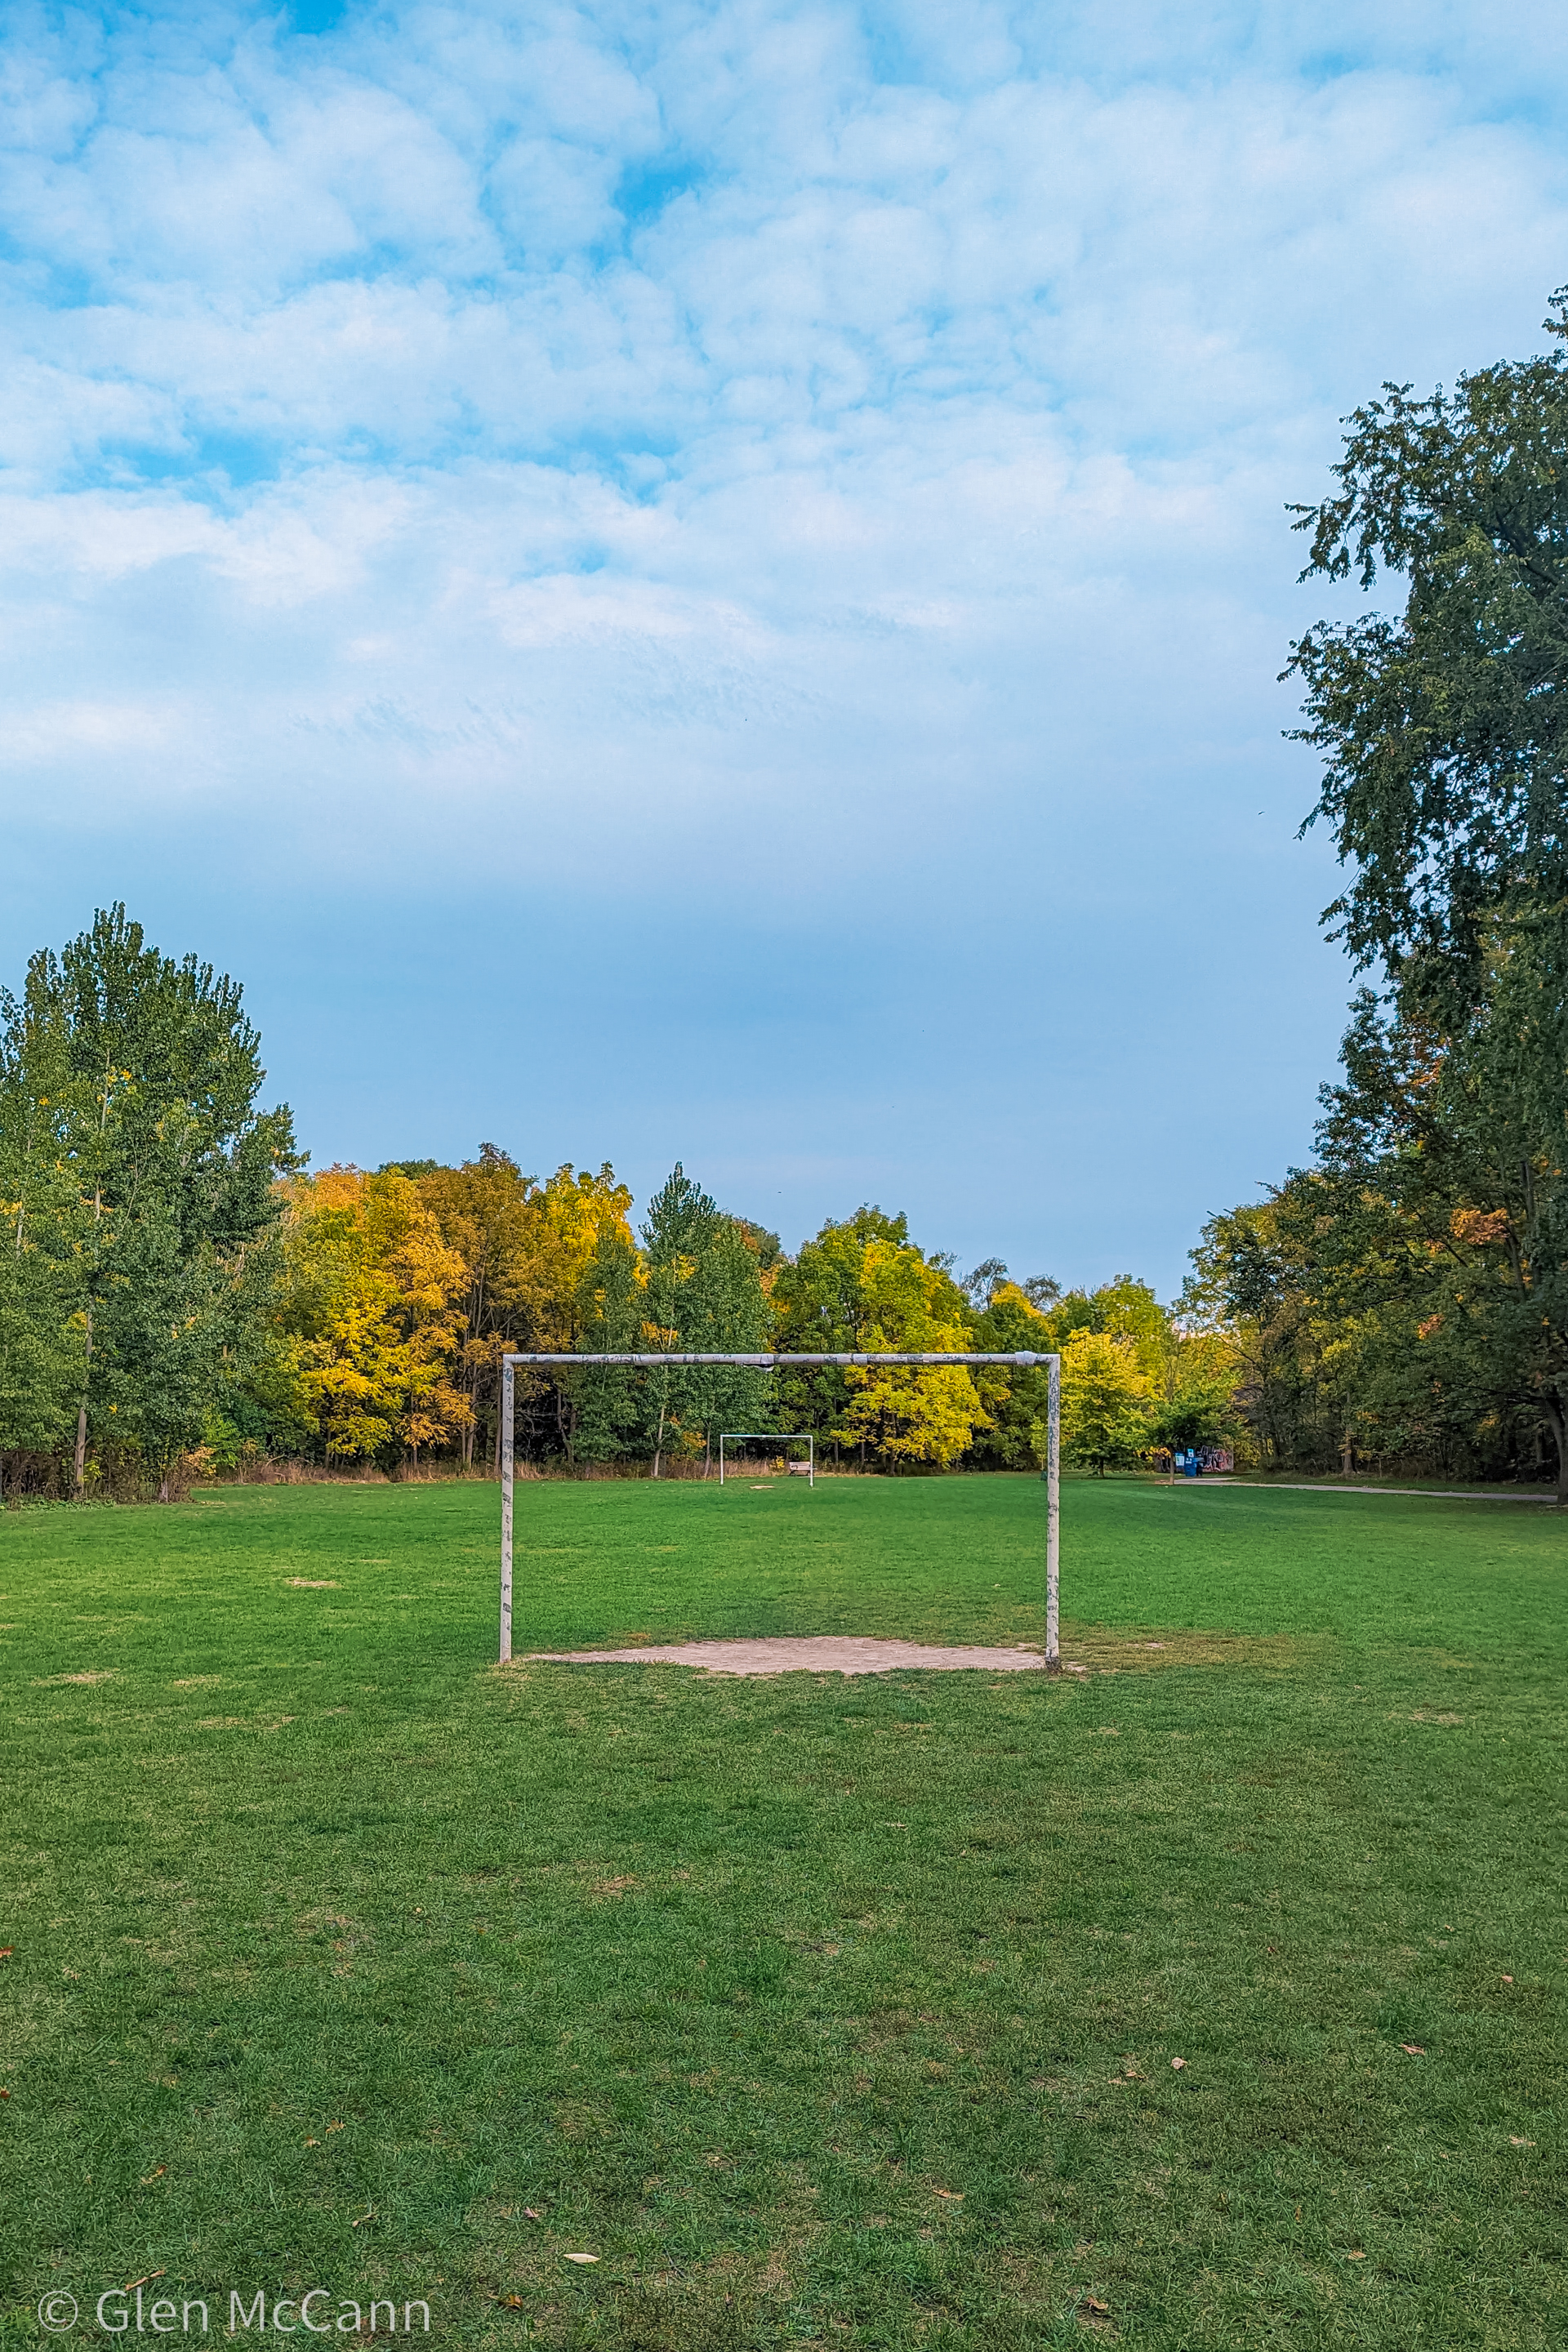 An empty soccer field in the summer, viewed from behind one of the goals.